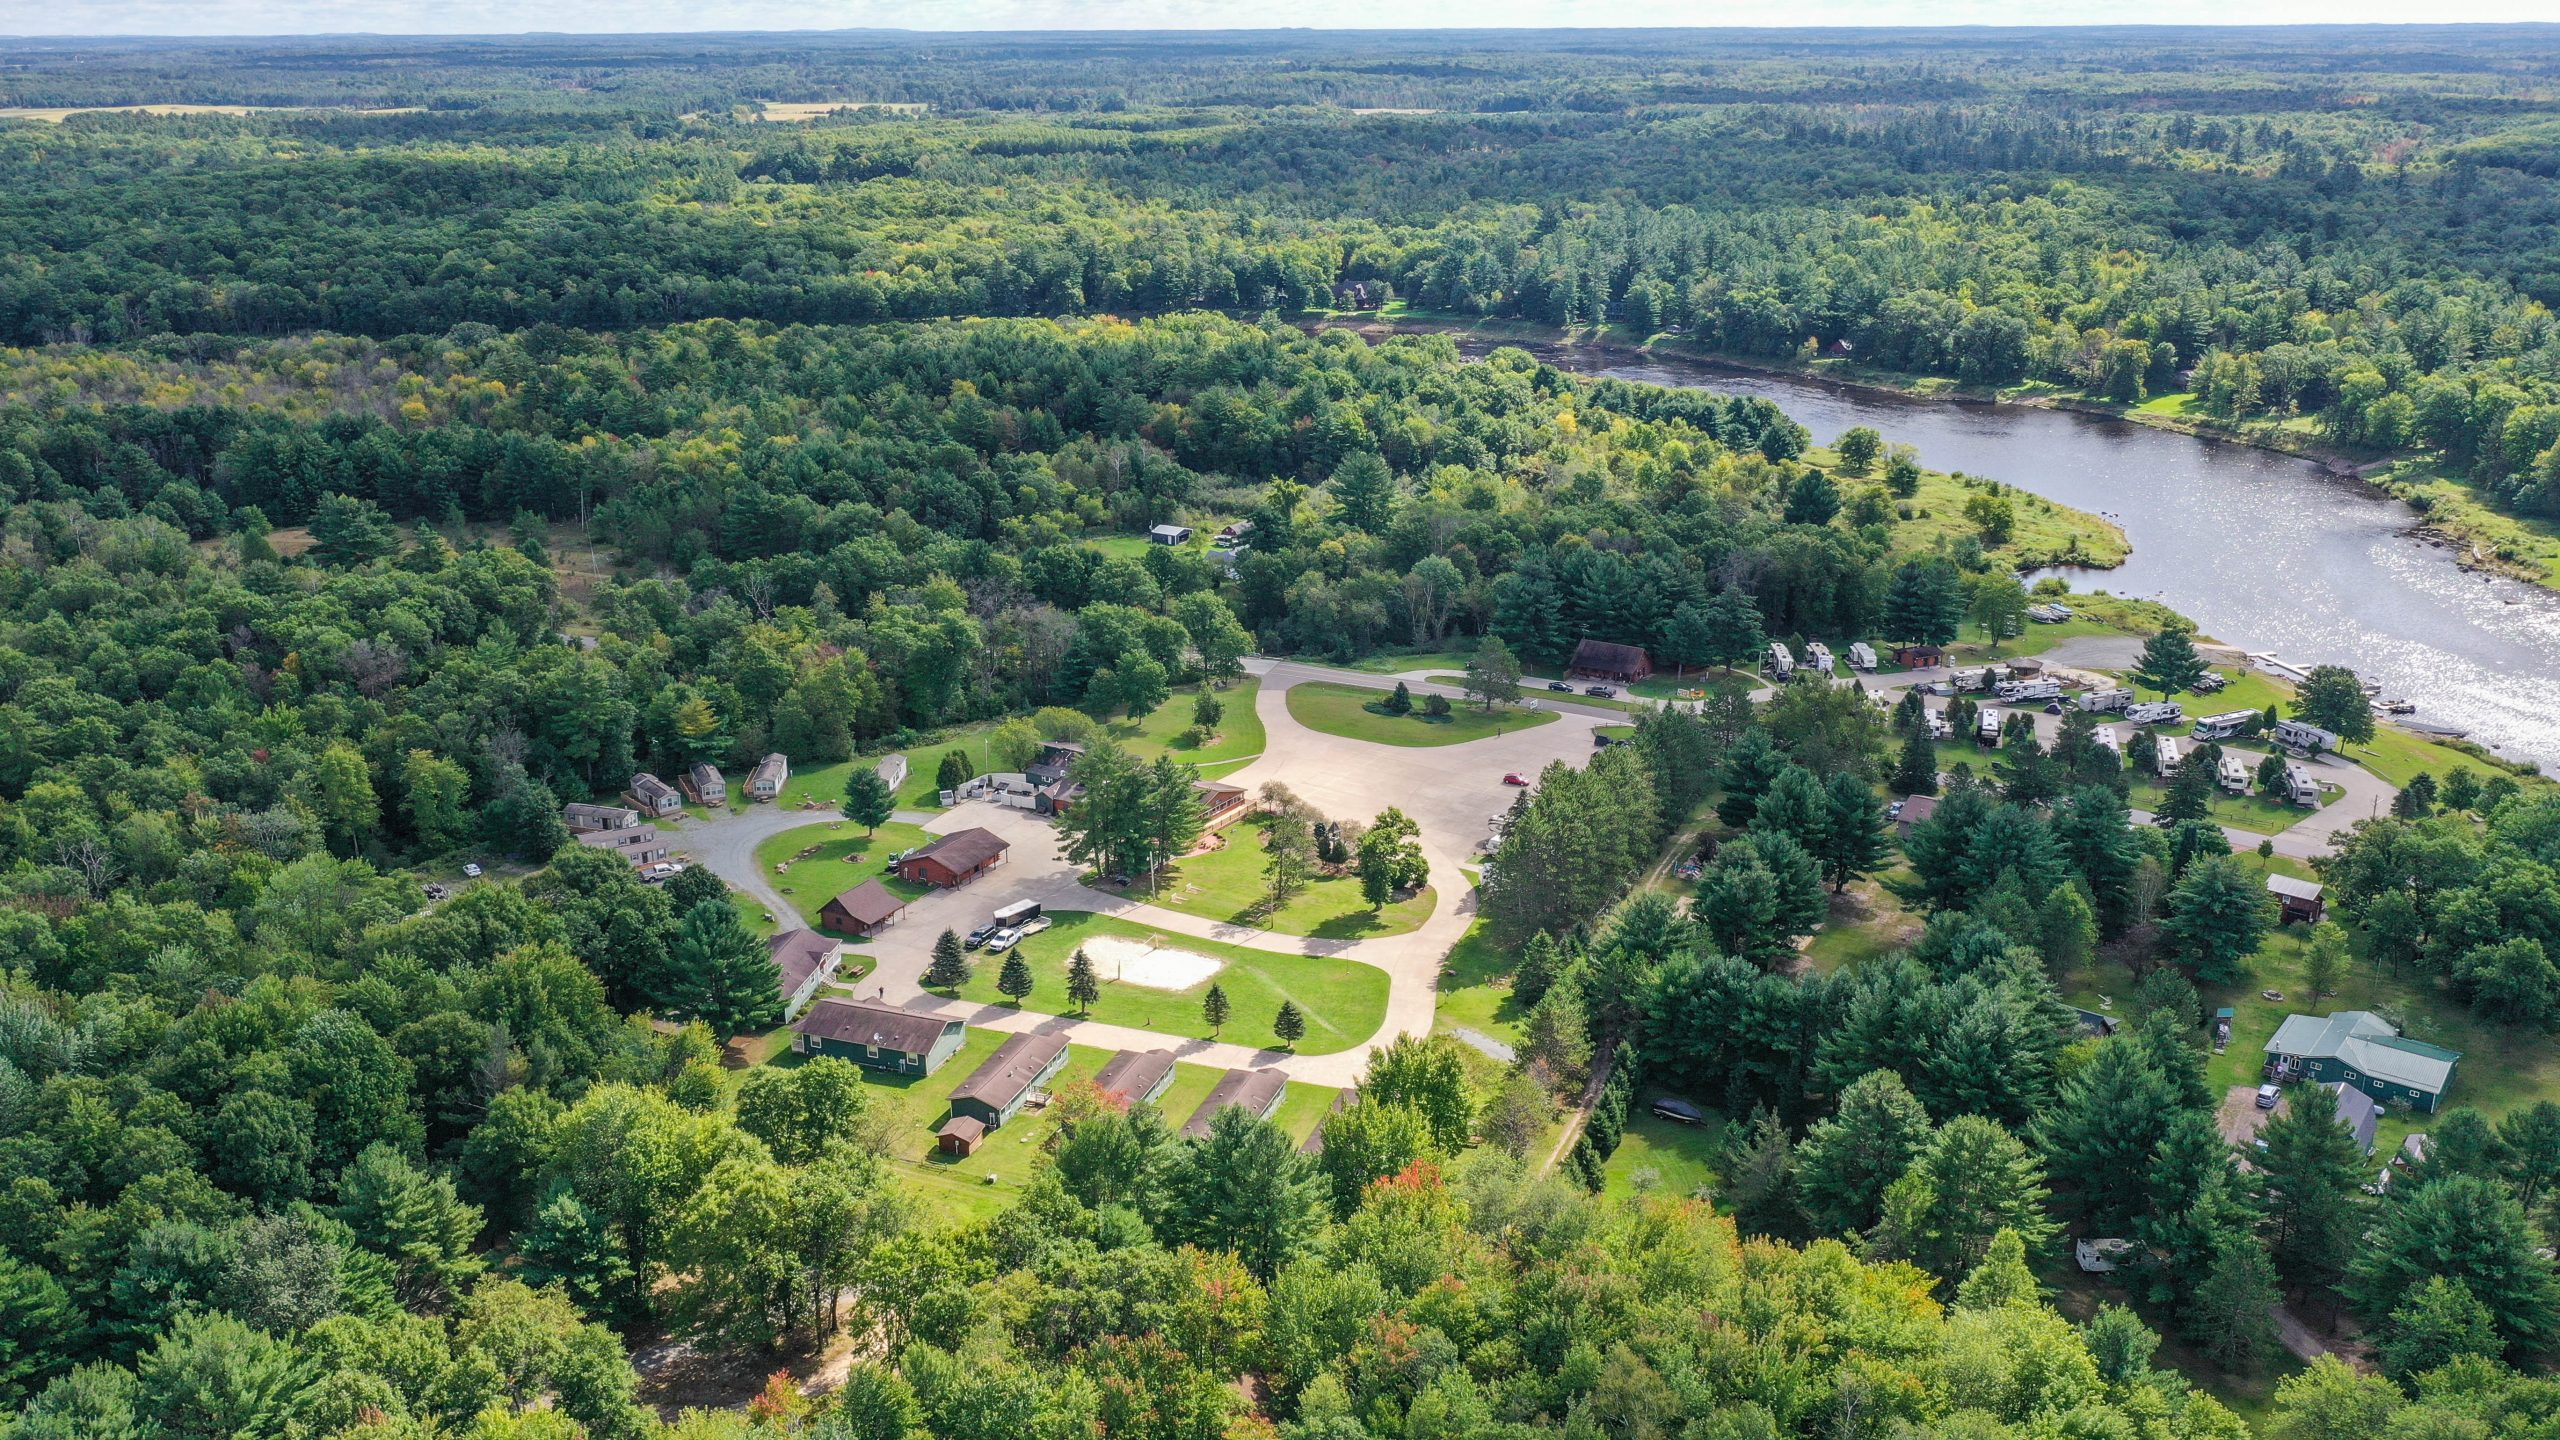 Premier Wisconsin Campground, Resort & Bar and Grill up for Auction